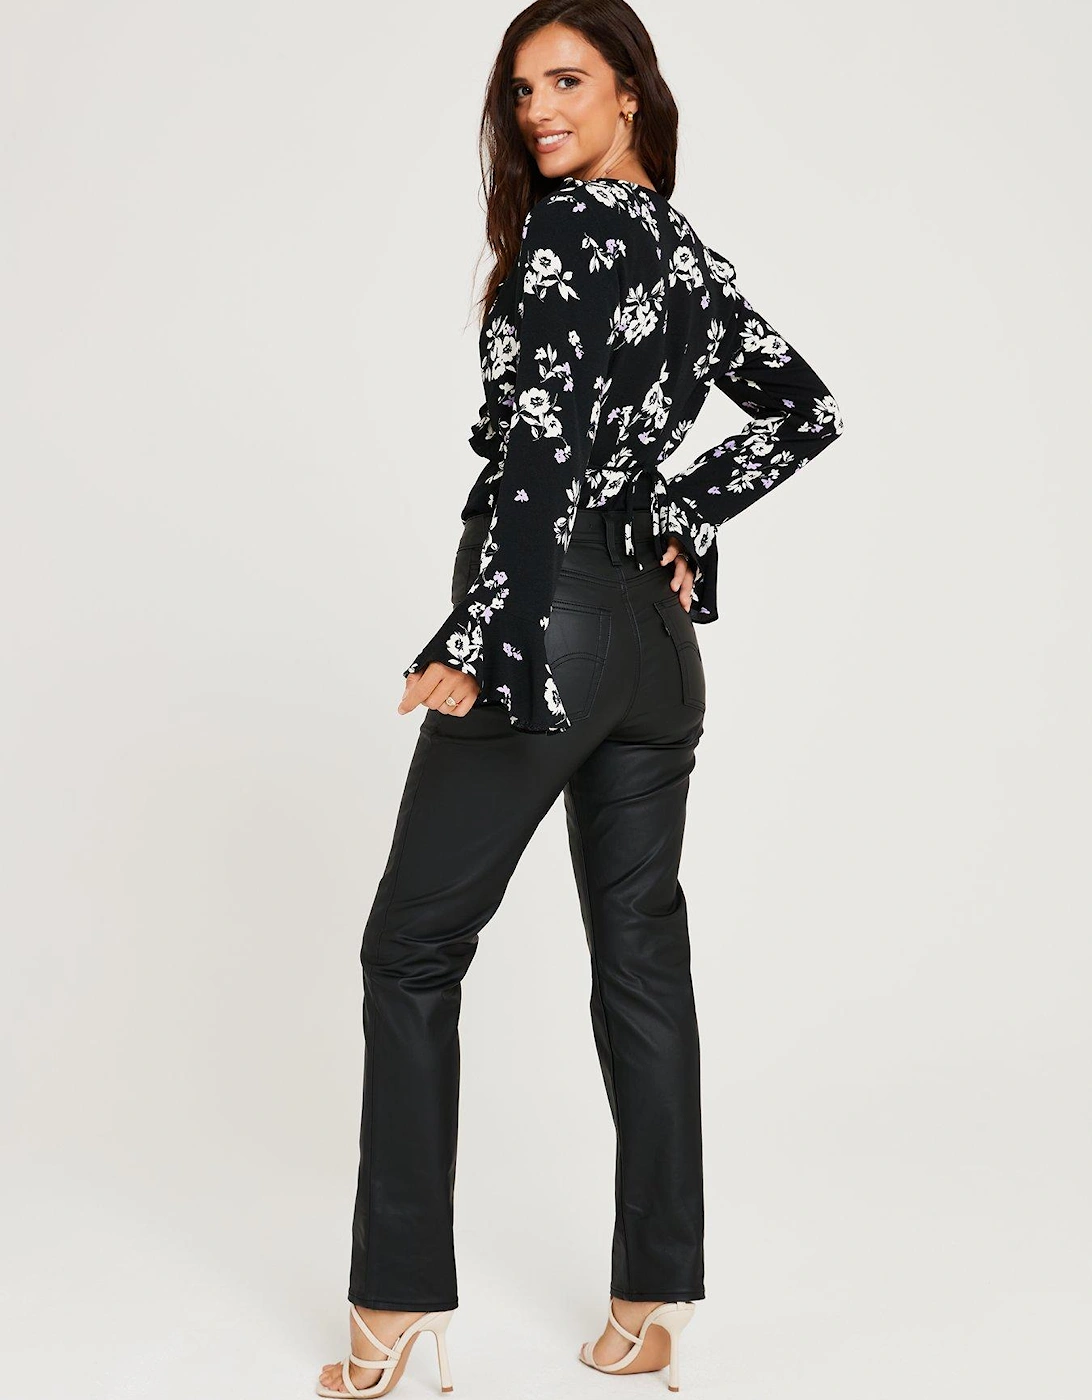 x V by Very Frill Wrap Blouse - Mono Floral